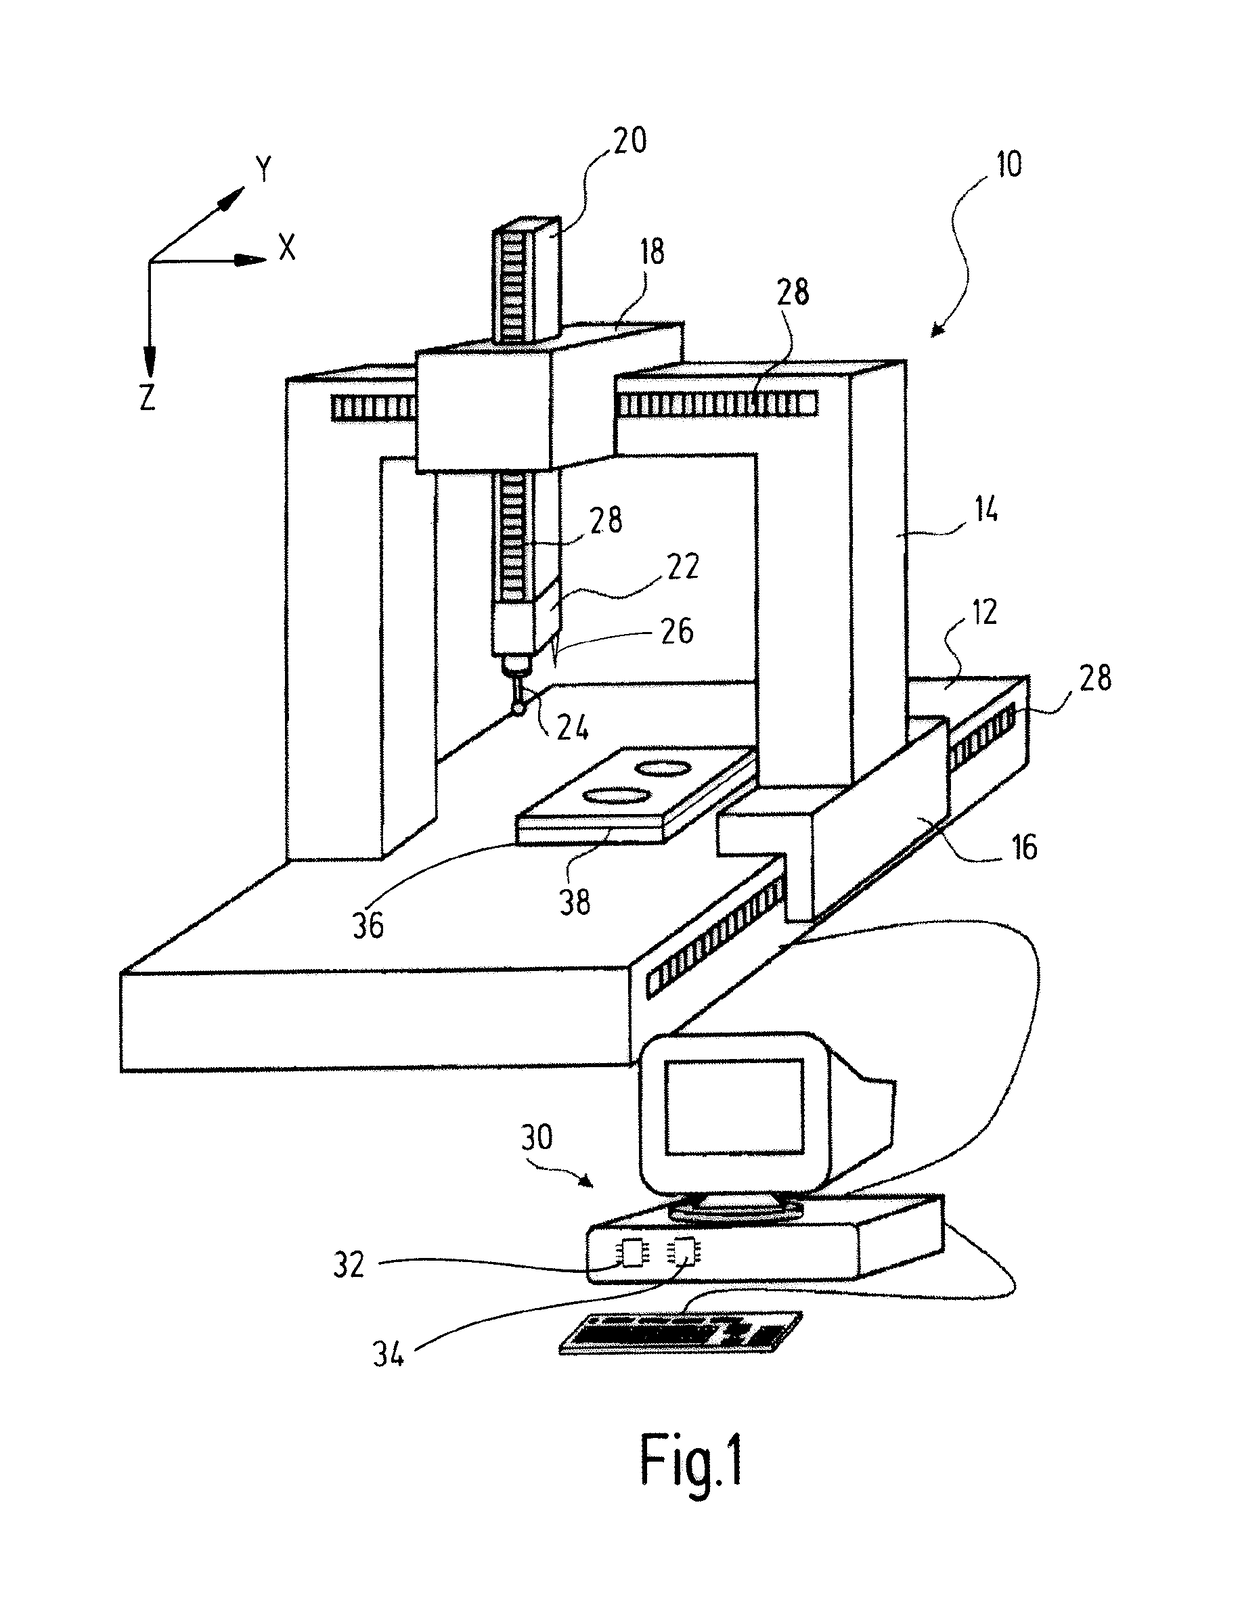 Method and arrangement for producing a workpiece by using additive manufacturing techniques